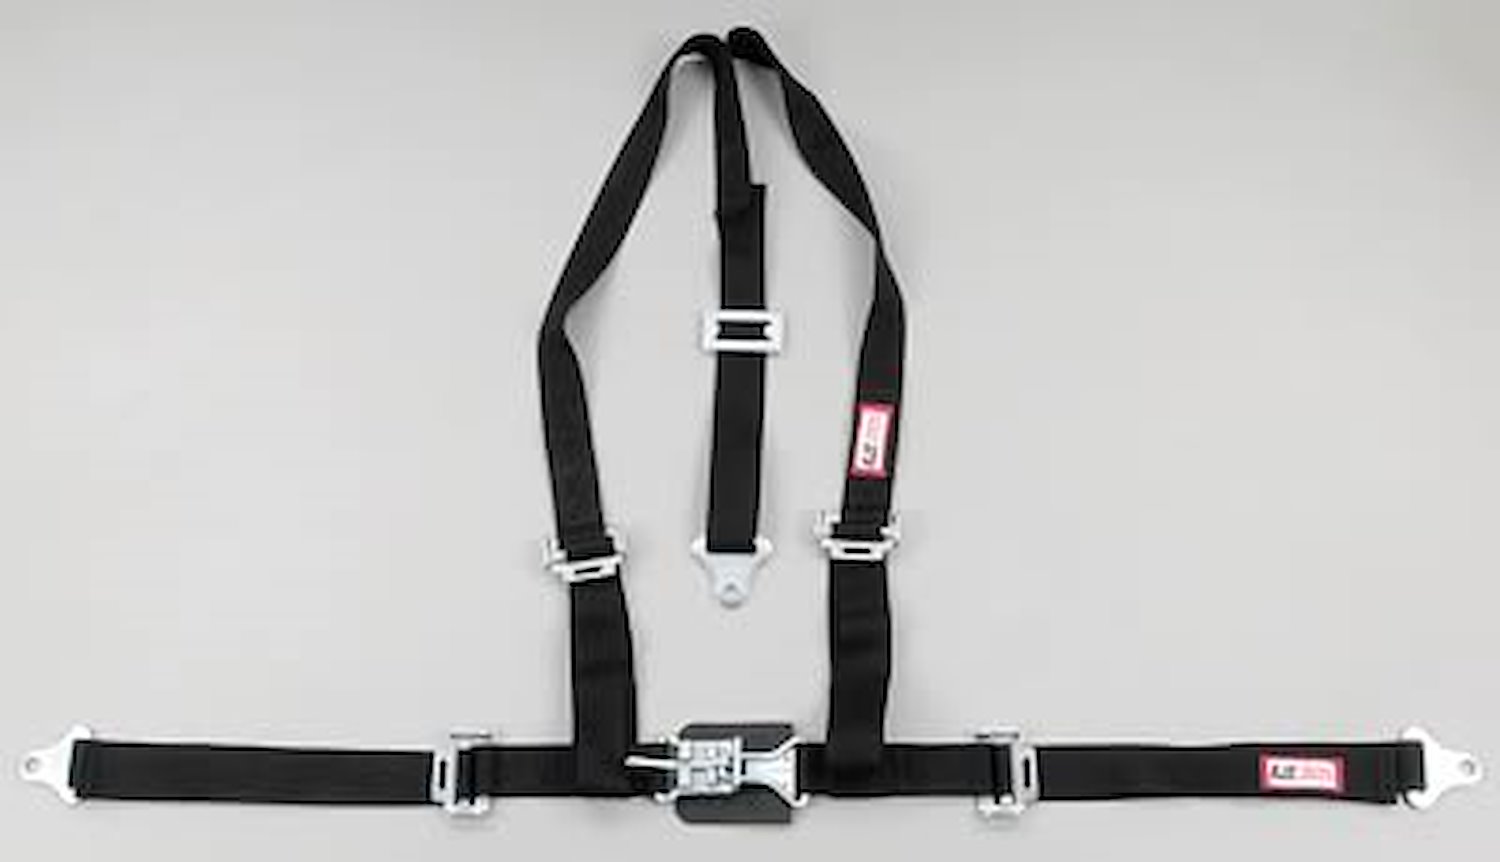 NON-SFI L&L HARNESS 3 PULL UP Lap Belt BOLT SEWN IN 2 S.H. Individual FLOOR Mount w/STERNUM STRAP WRAP/BOLT RED